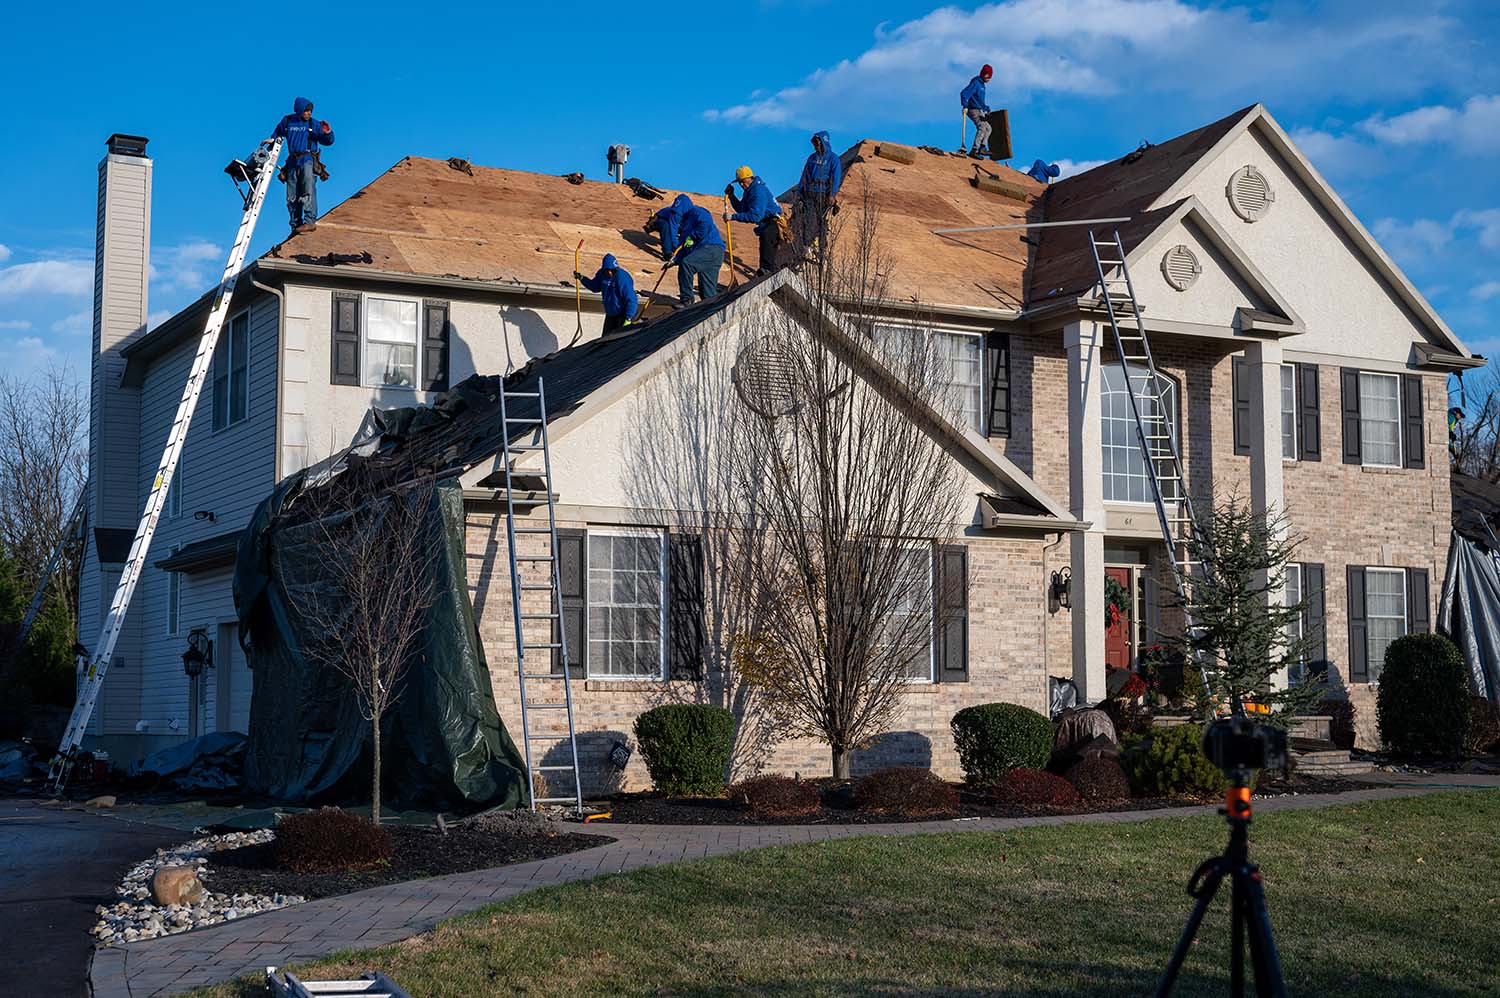 Lancaster Roofing repair company - residential roofing contractors in Lancaster, PA (medium image)